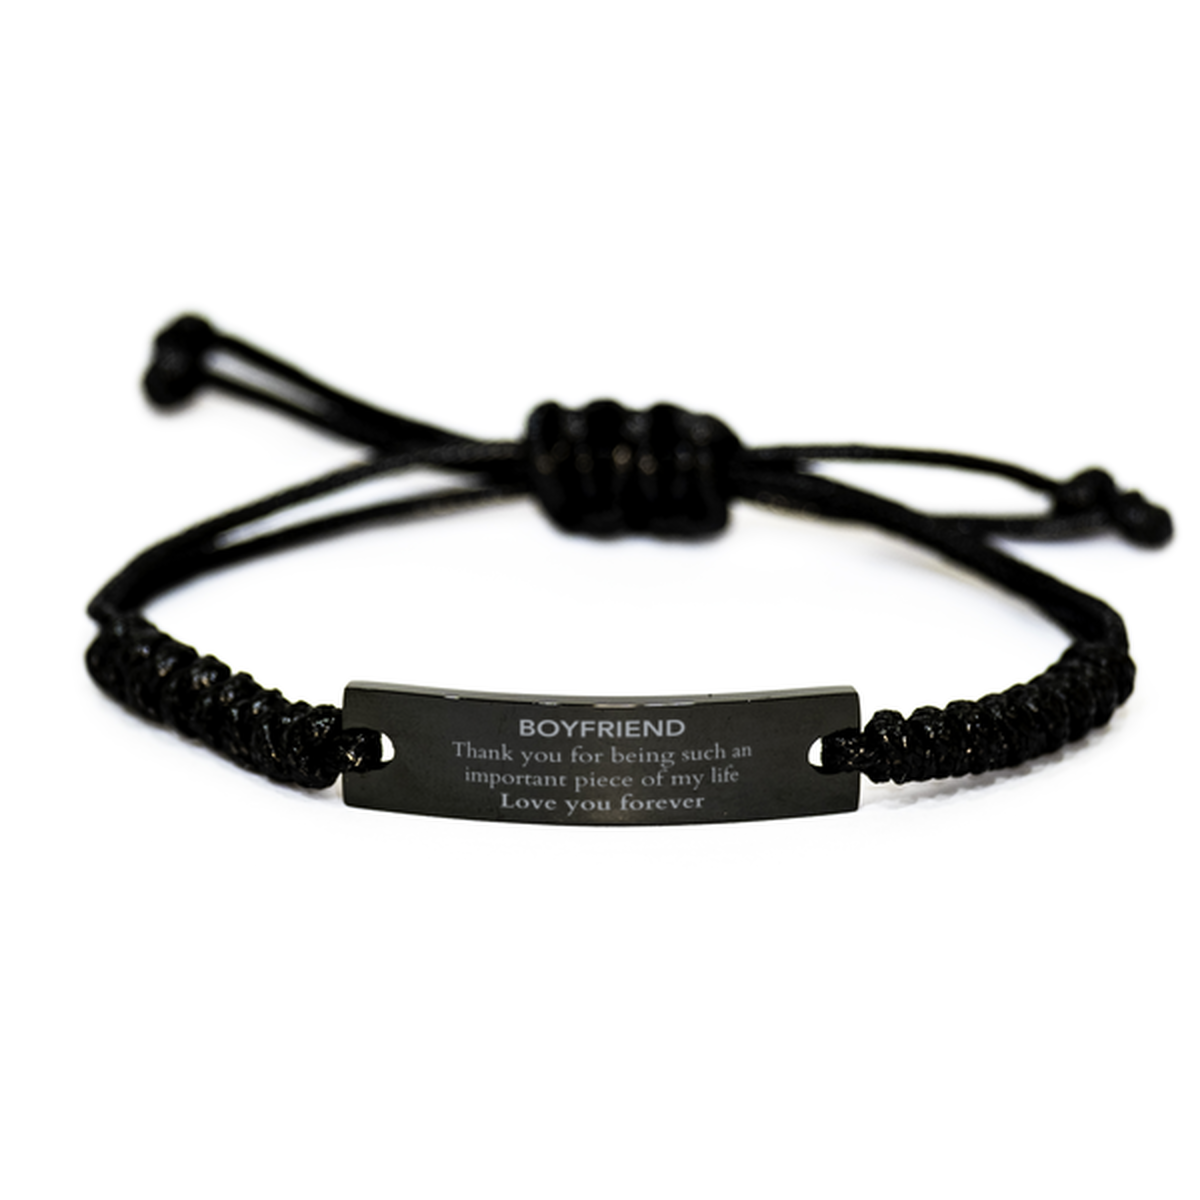 Appropriate Boyfriend Black Rope Bracelet Epic Birthday Gifts for Boyfriend Thank you for being such an important piece of my life Boyfriend Christmas Mothers Fathers Day